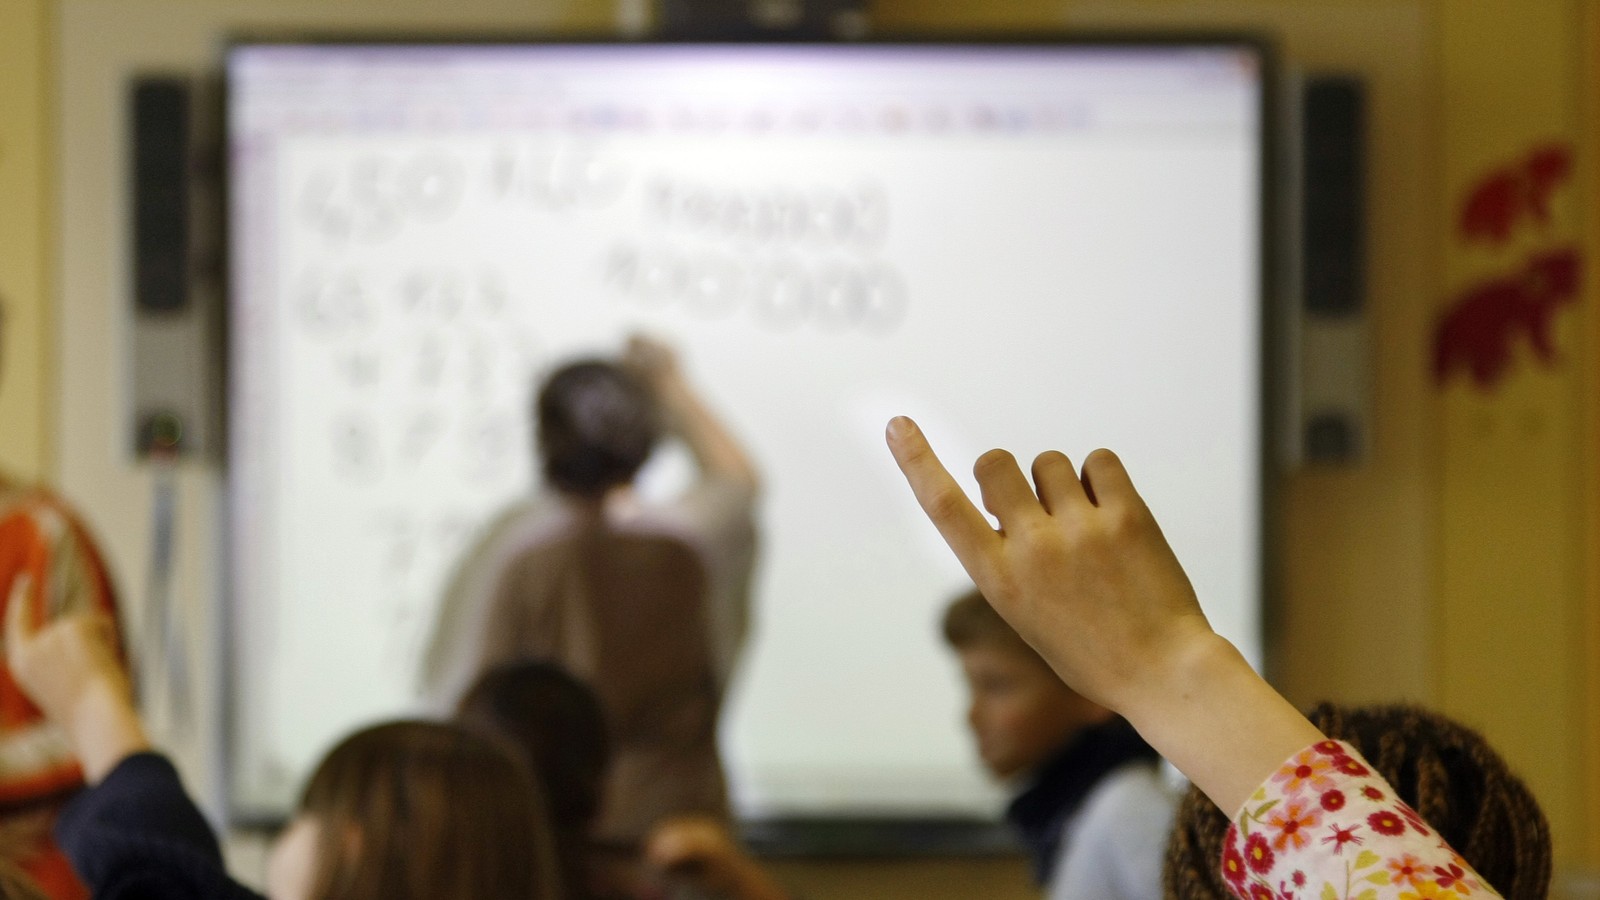 Study finds English lessons on Teachers Pay Teachers, others 'mediocre